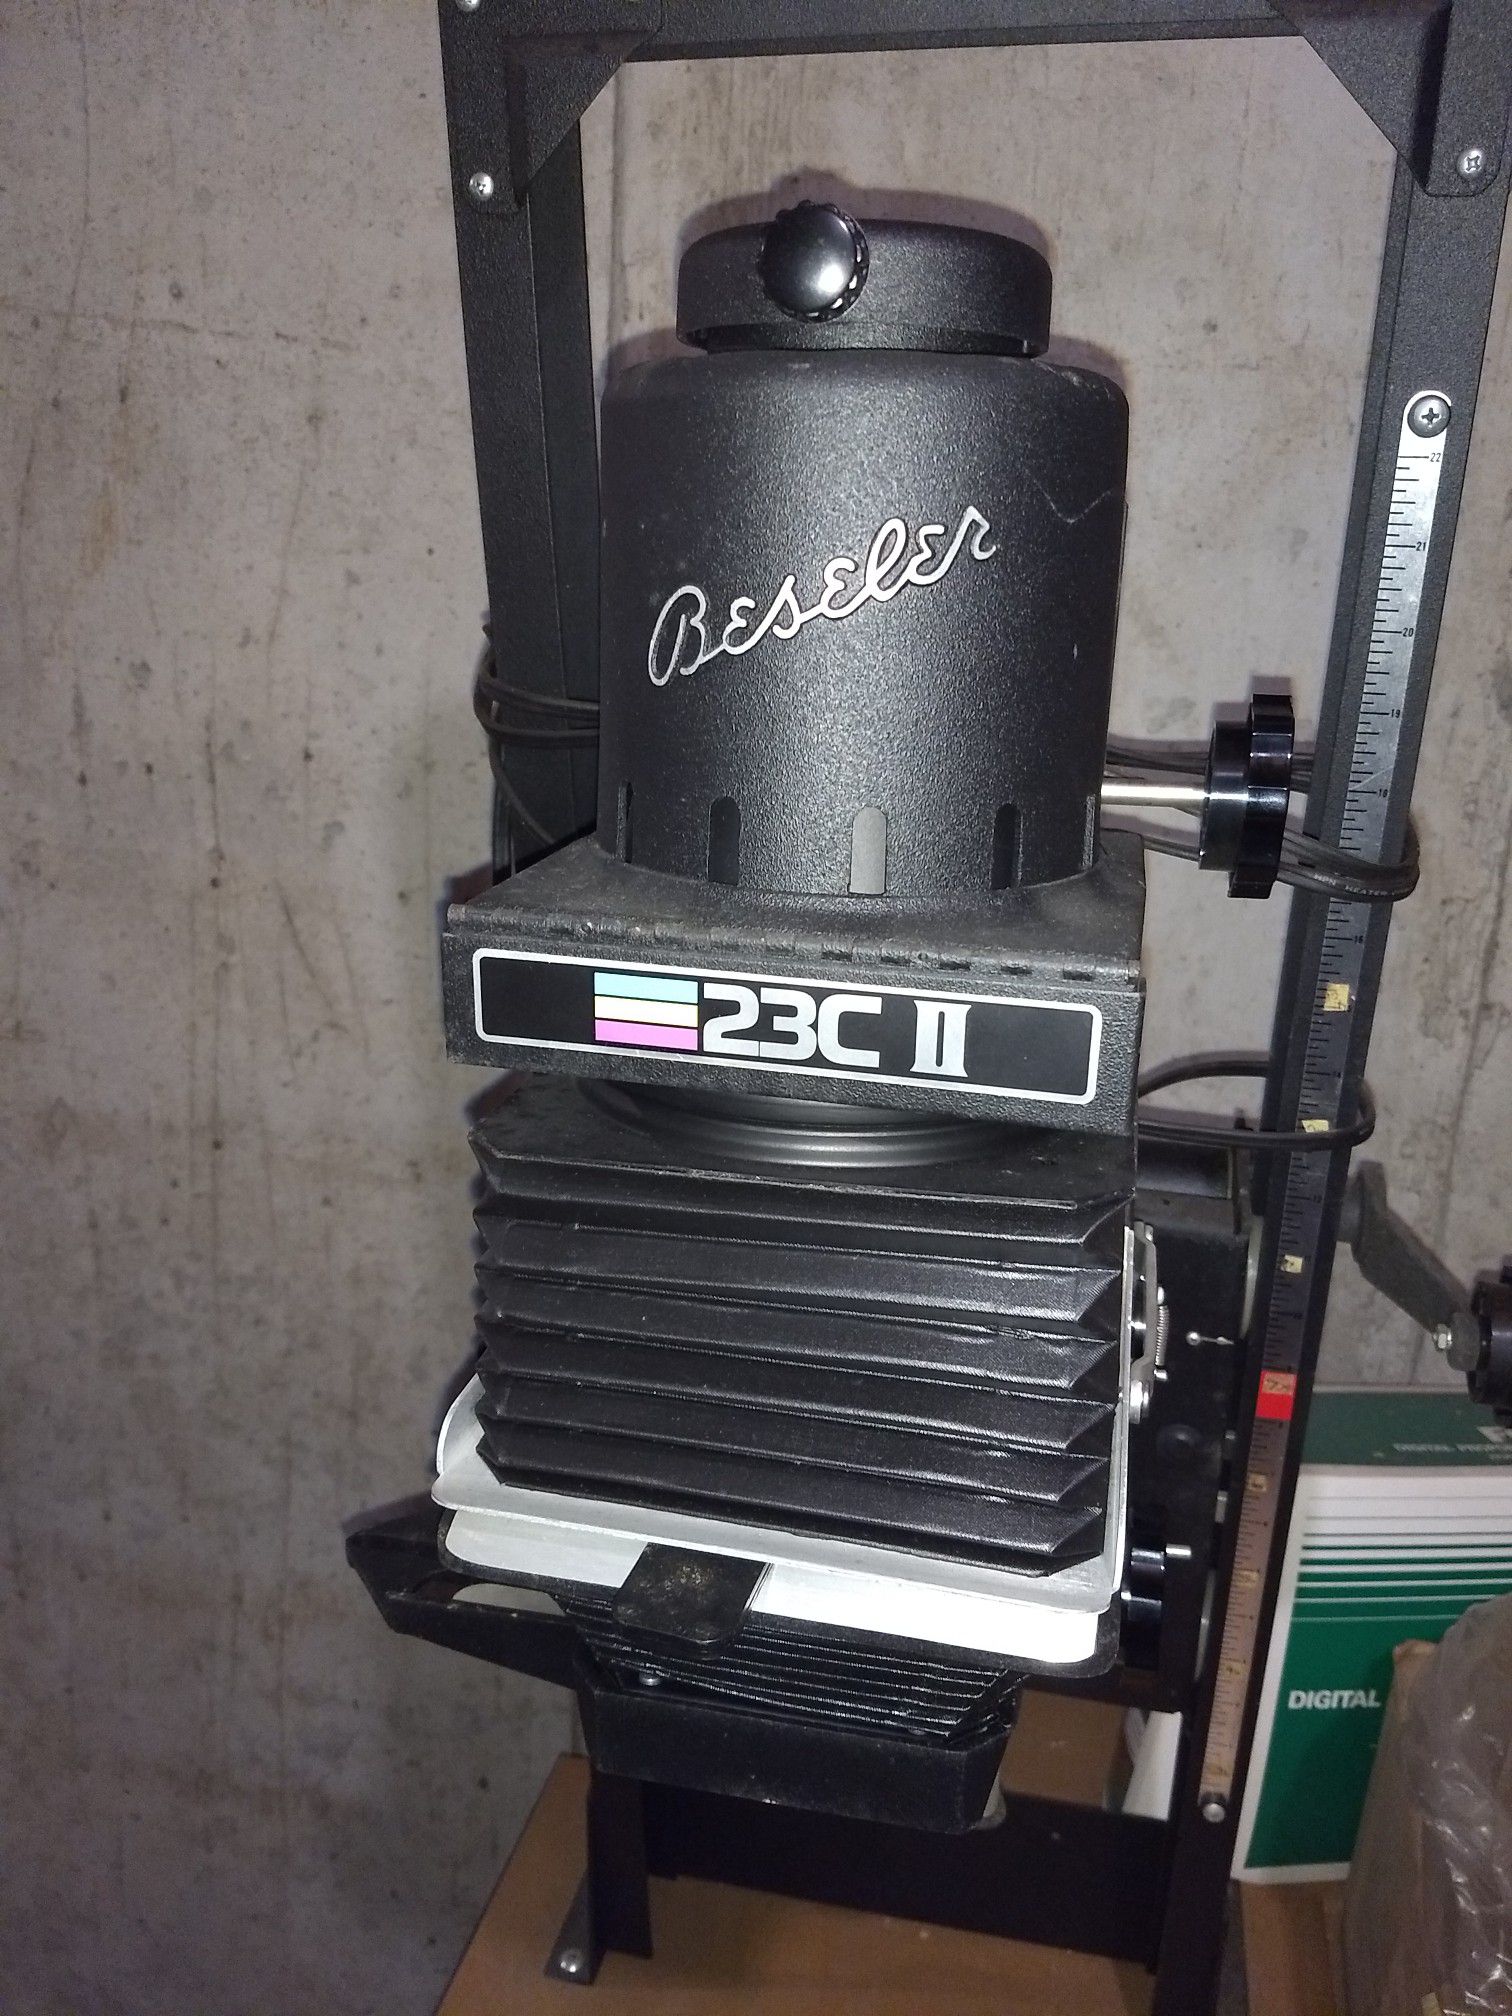 Beseler 23CII XL Enlarger with a bunch of photo sruff